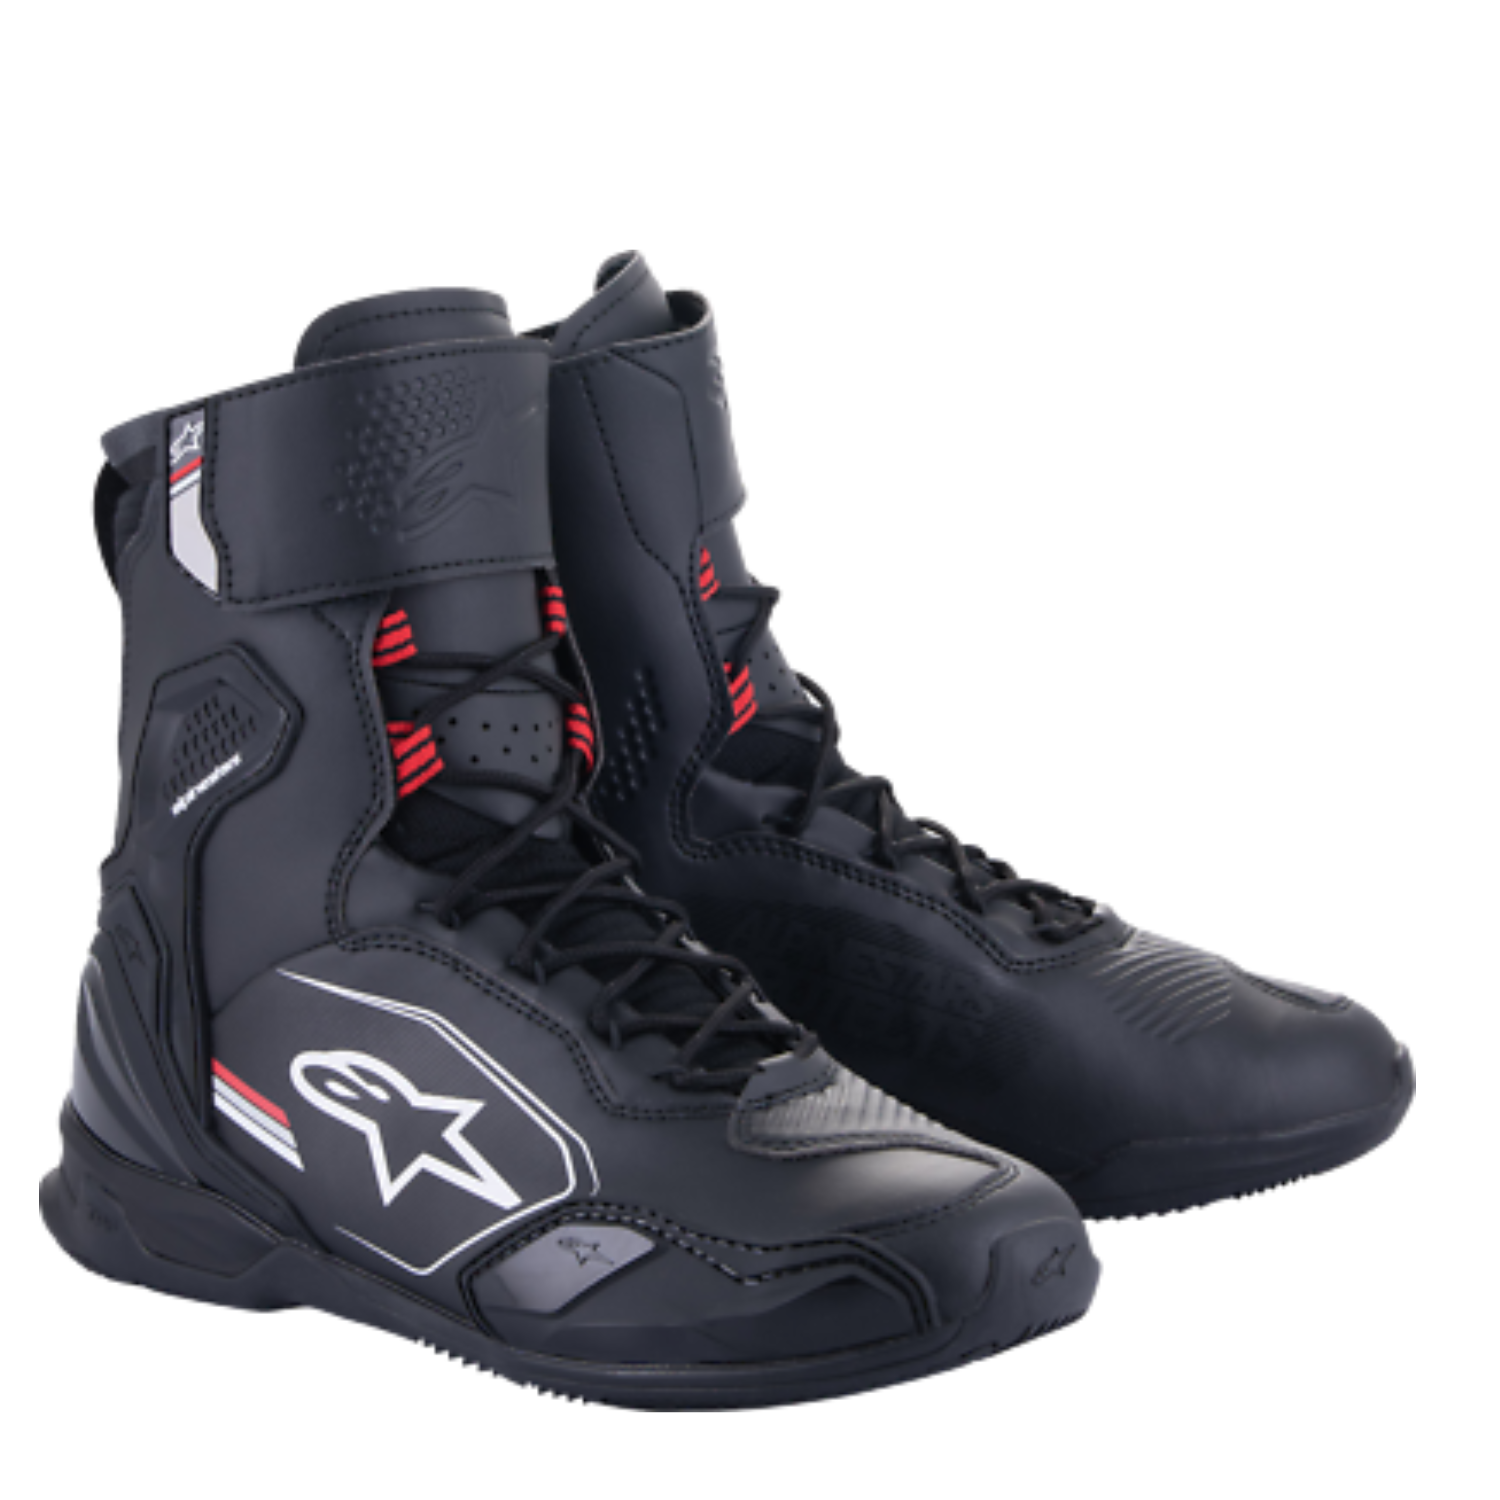 Image of Alpinestars Superfaster Shoes Black Gray Bright Red Taille US 10